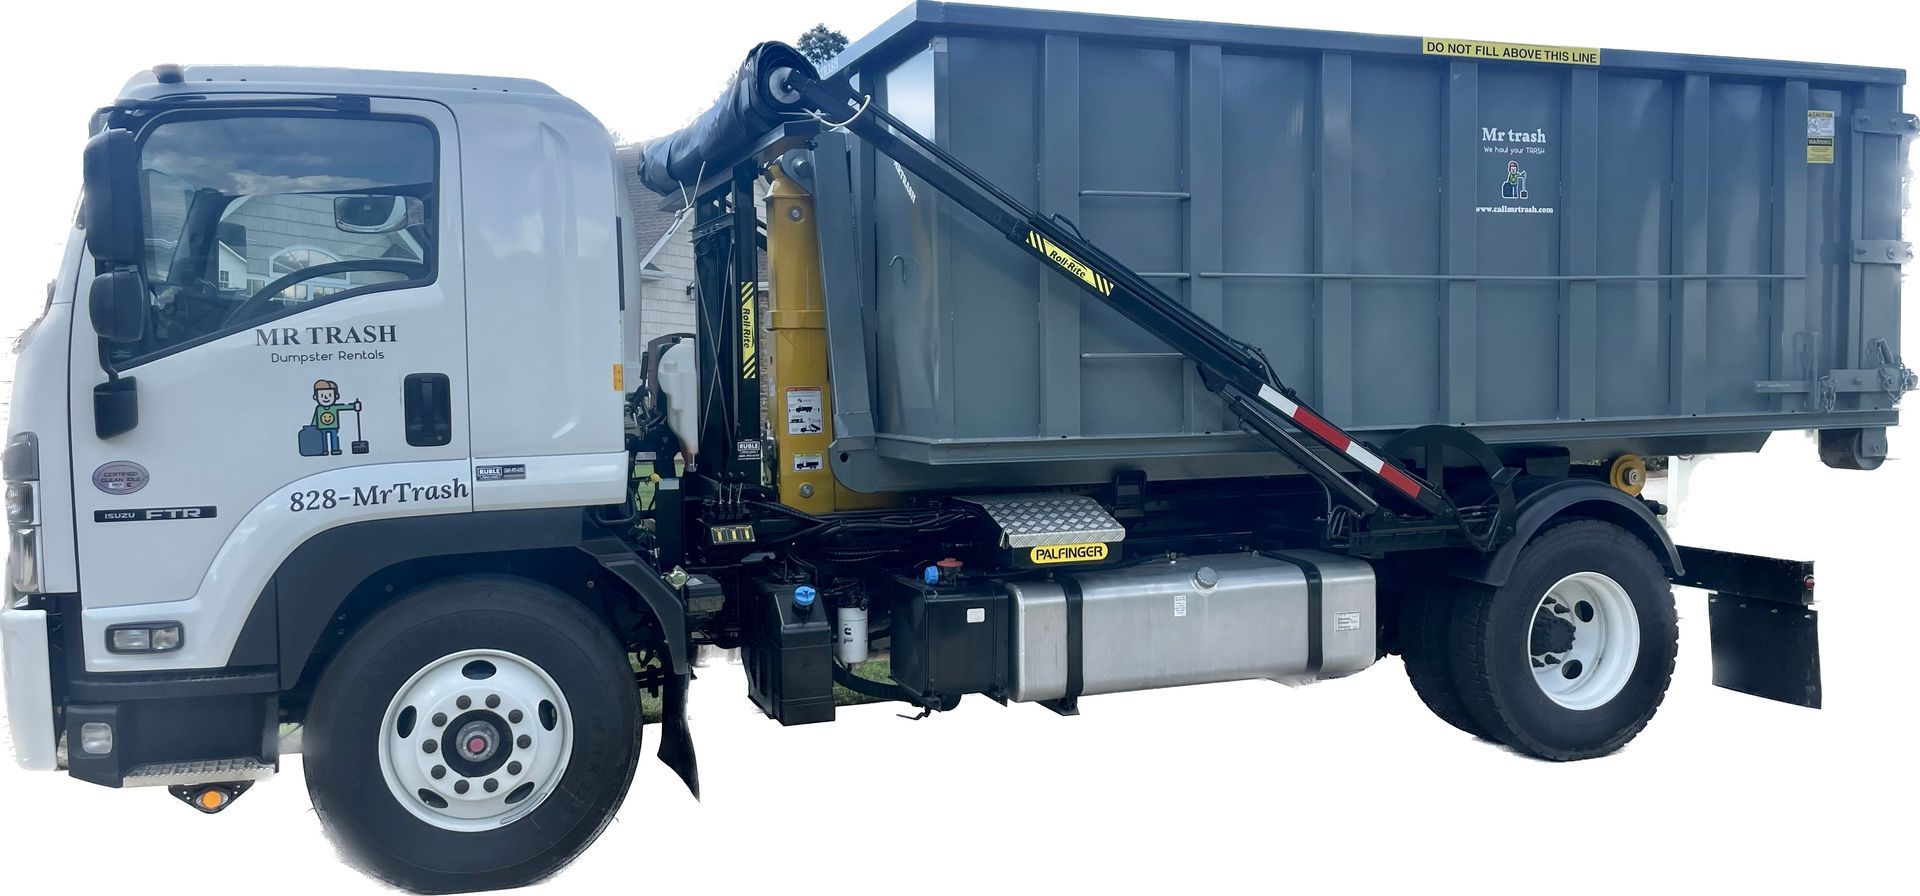 Versatile dumpster truck from Mr. Trash Dumpster Rentals: Capable of handling both 16 and 23-yard dumpsters for efficient waste management in Spartanburg, SC, and nearby areas.